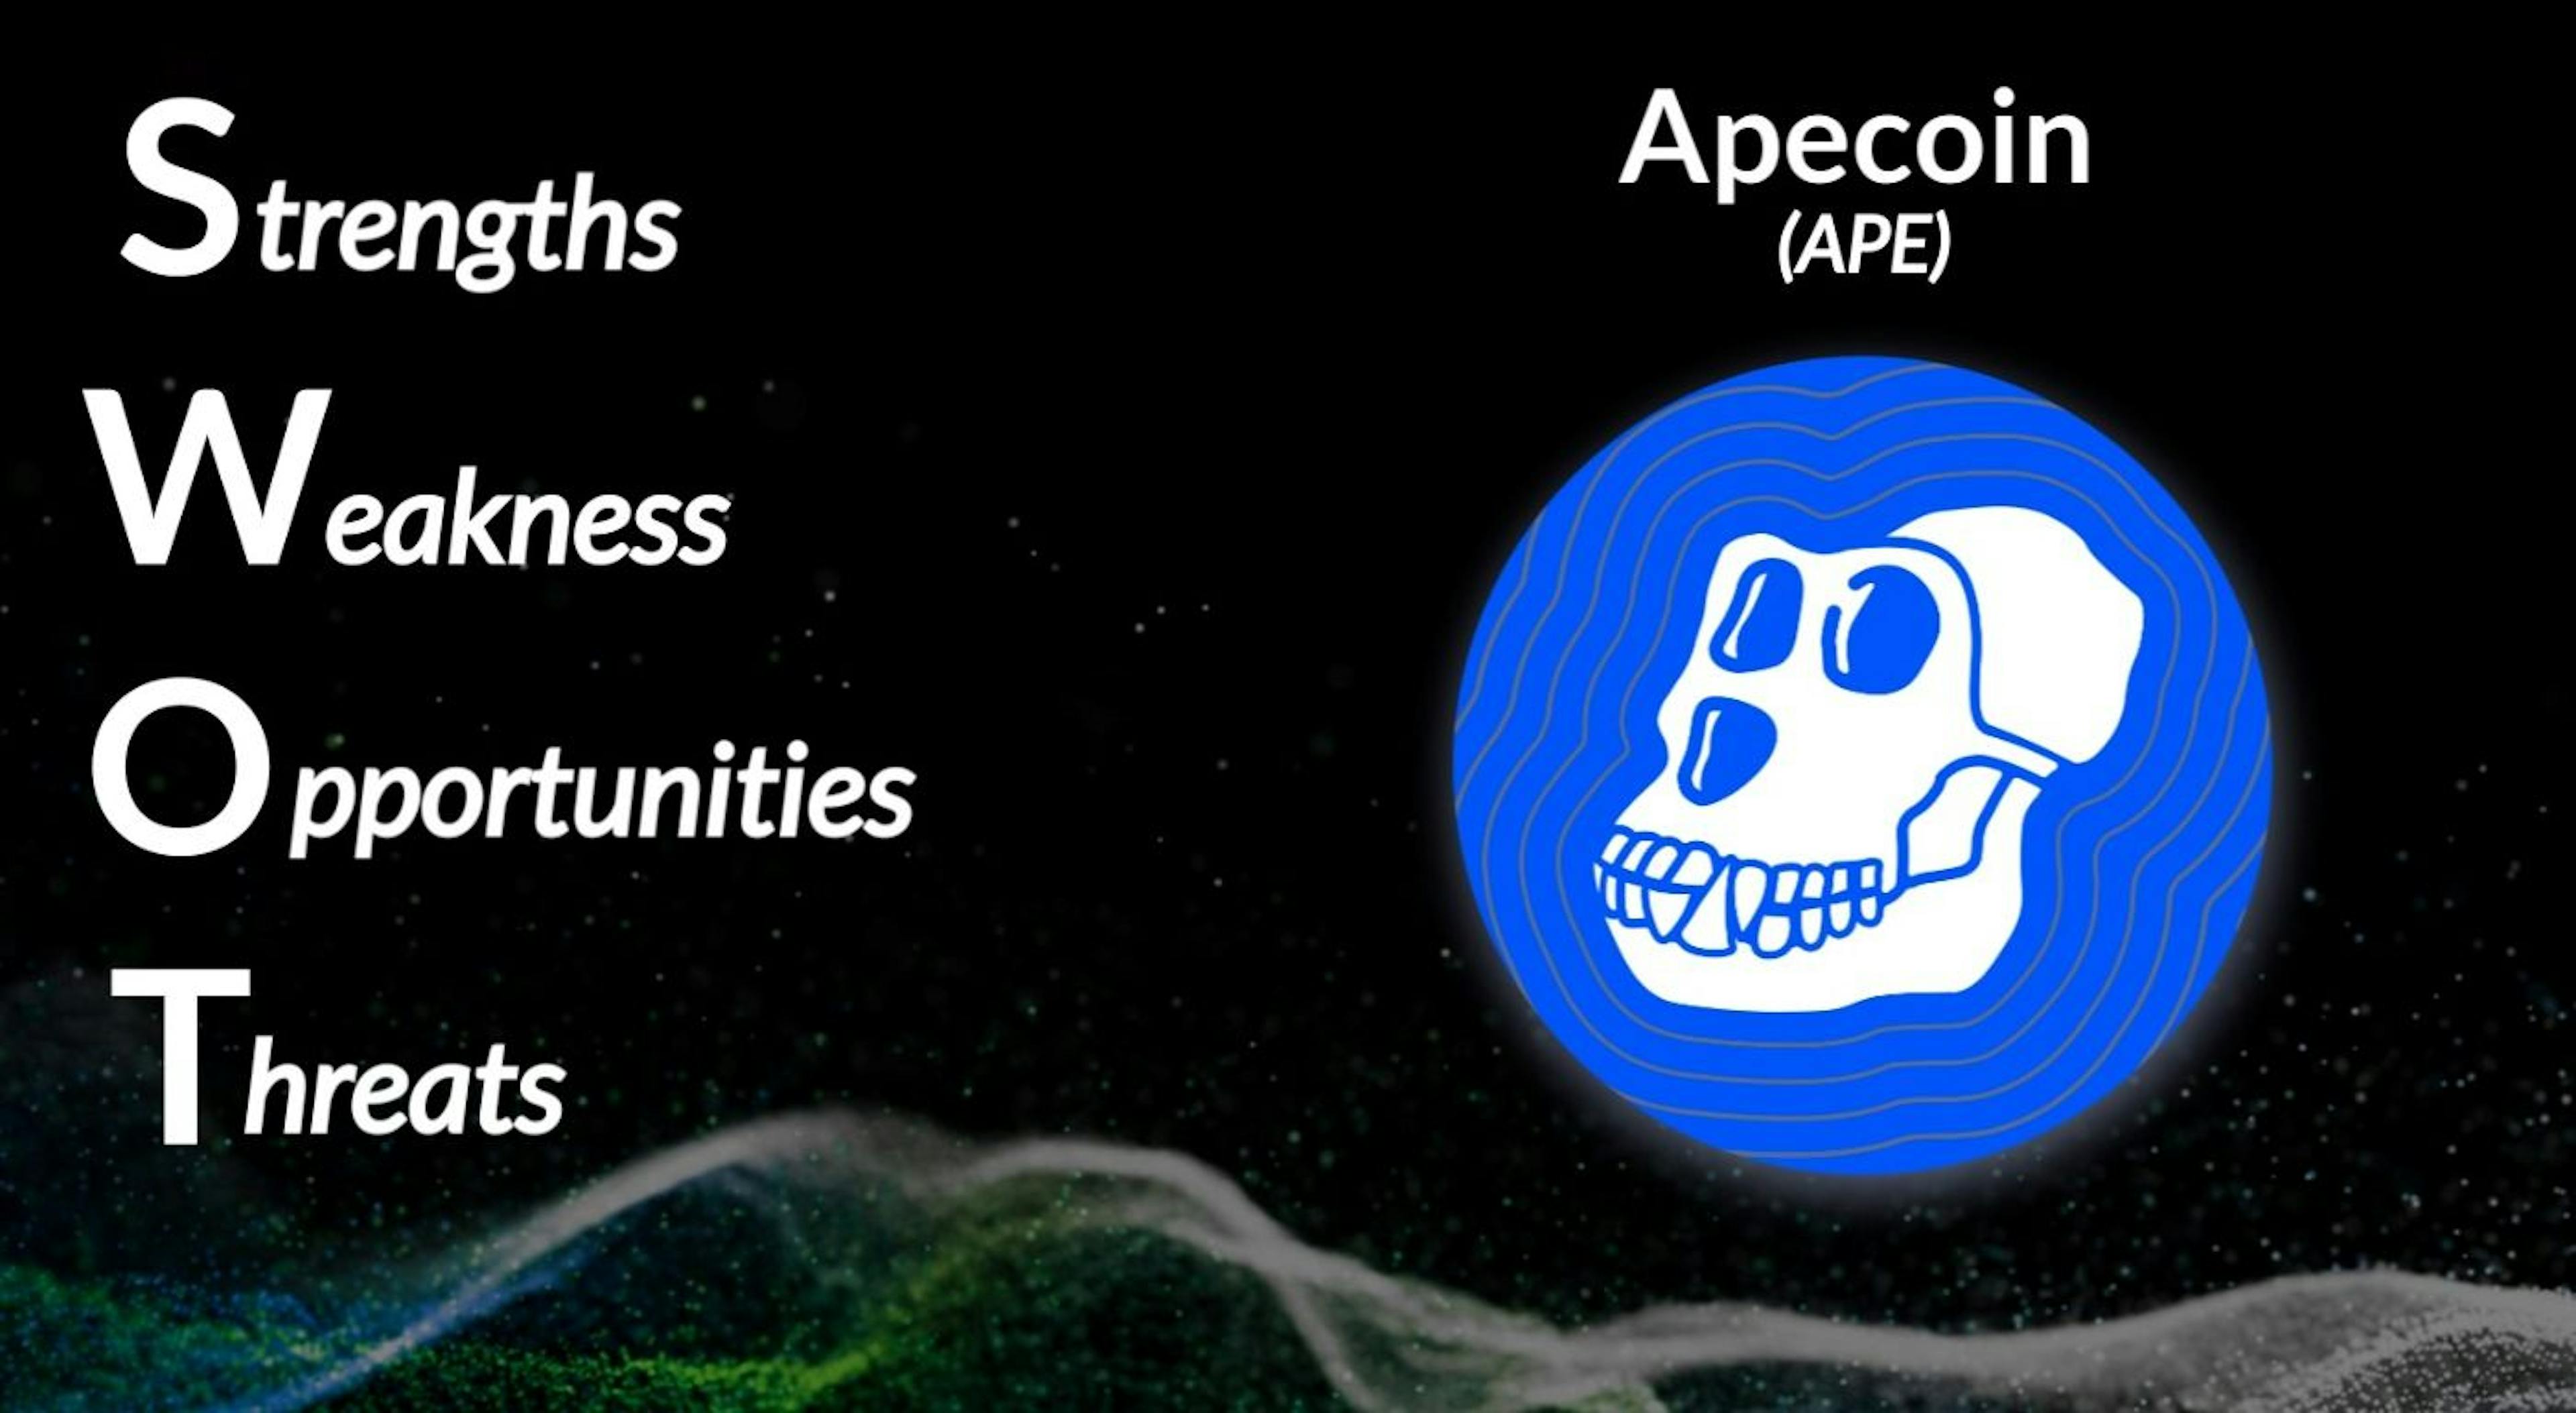 featured image - Die Apecoin (APE) SWOT-Analyse